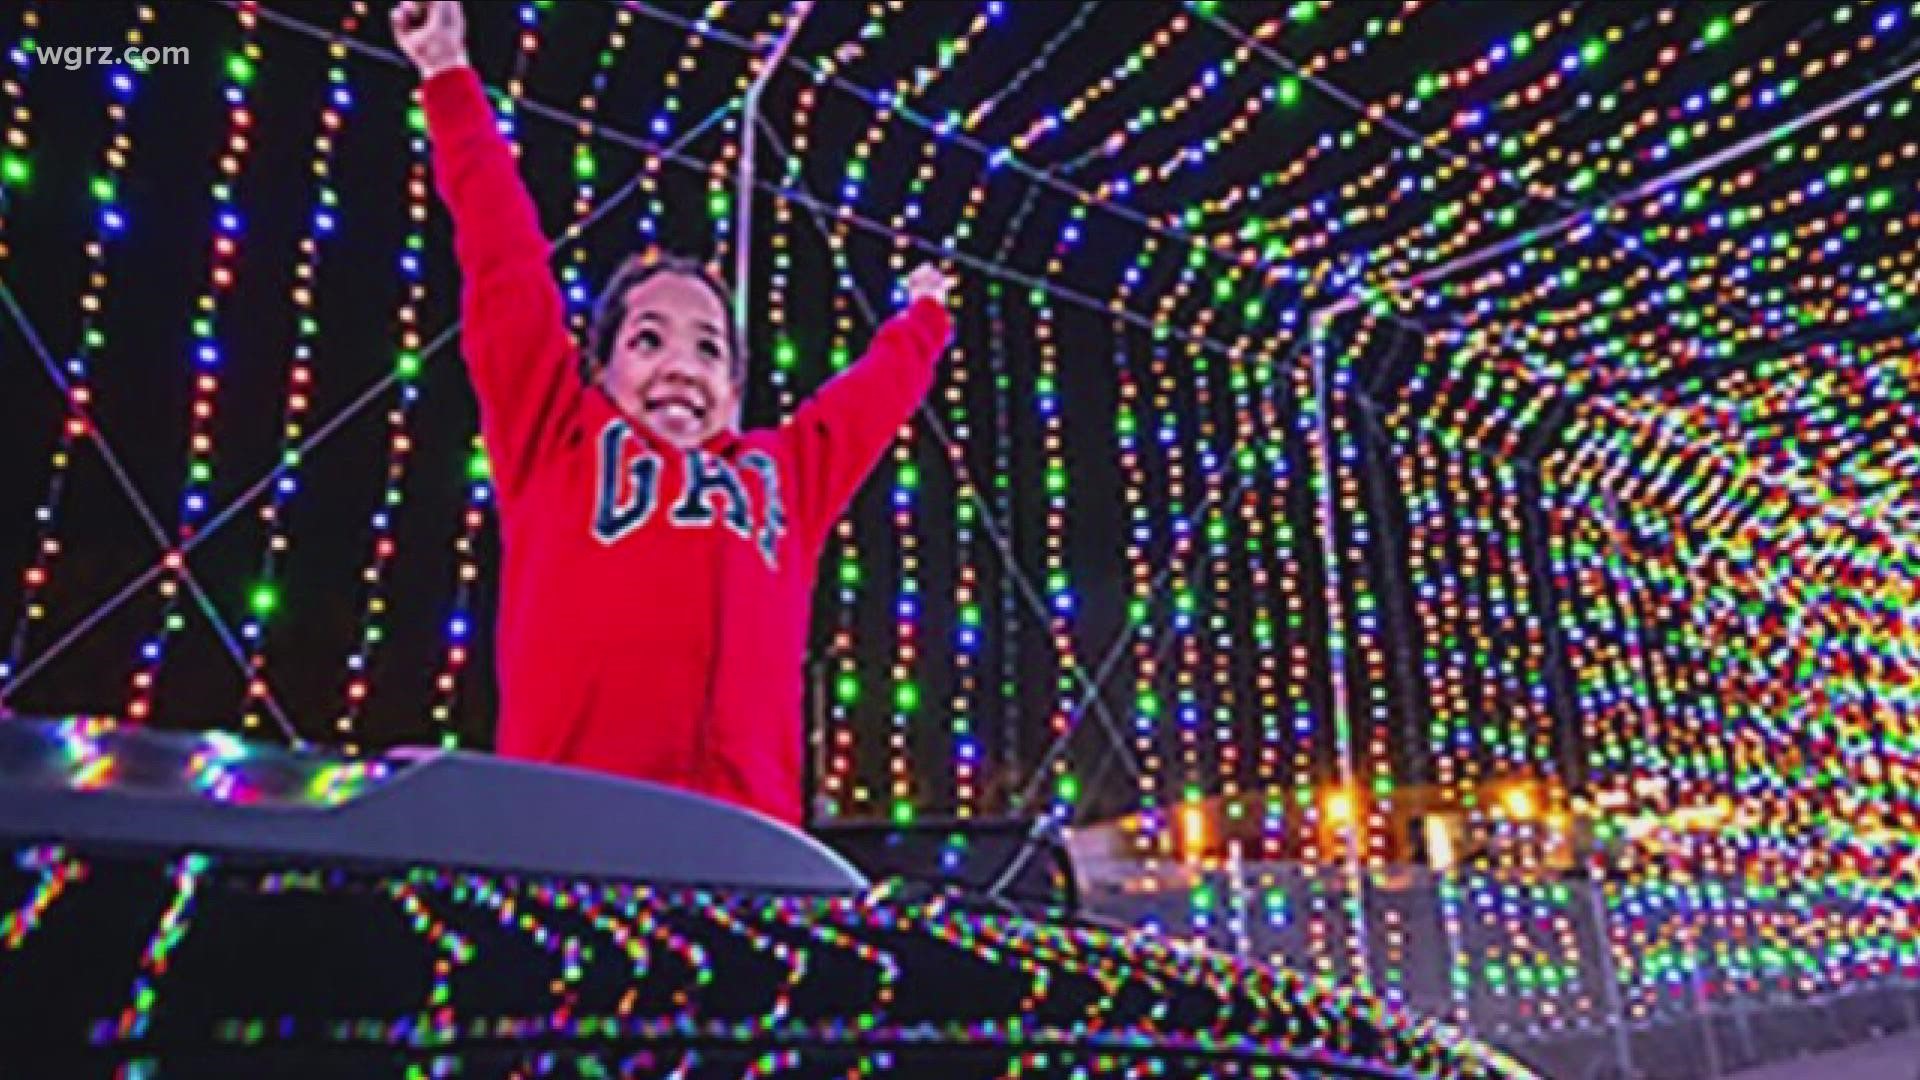 The amusement park is already preparing to deck the halls with the "Magic of Lights."